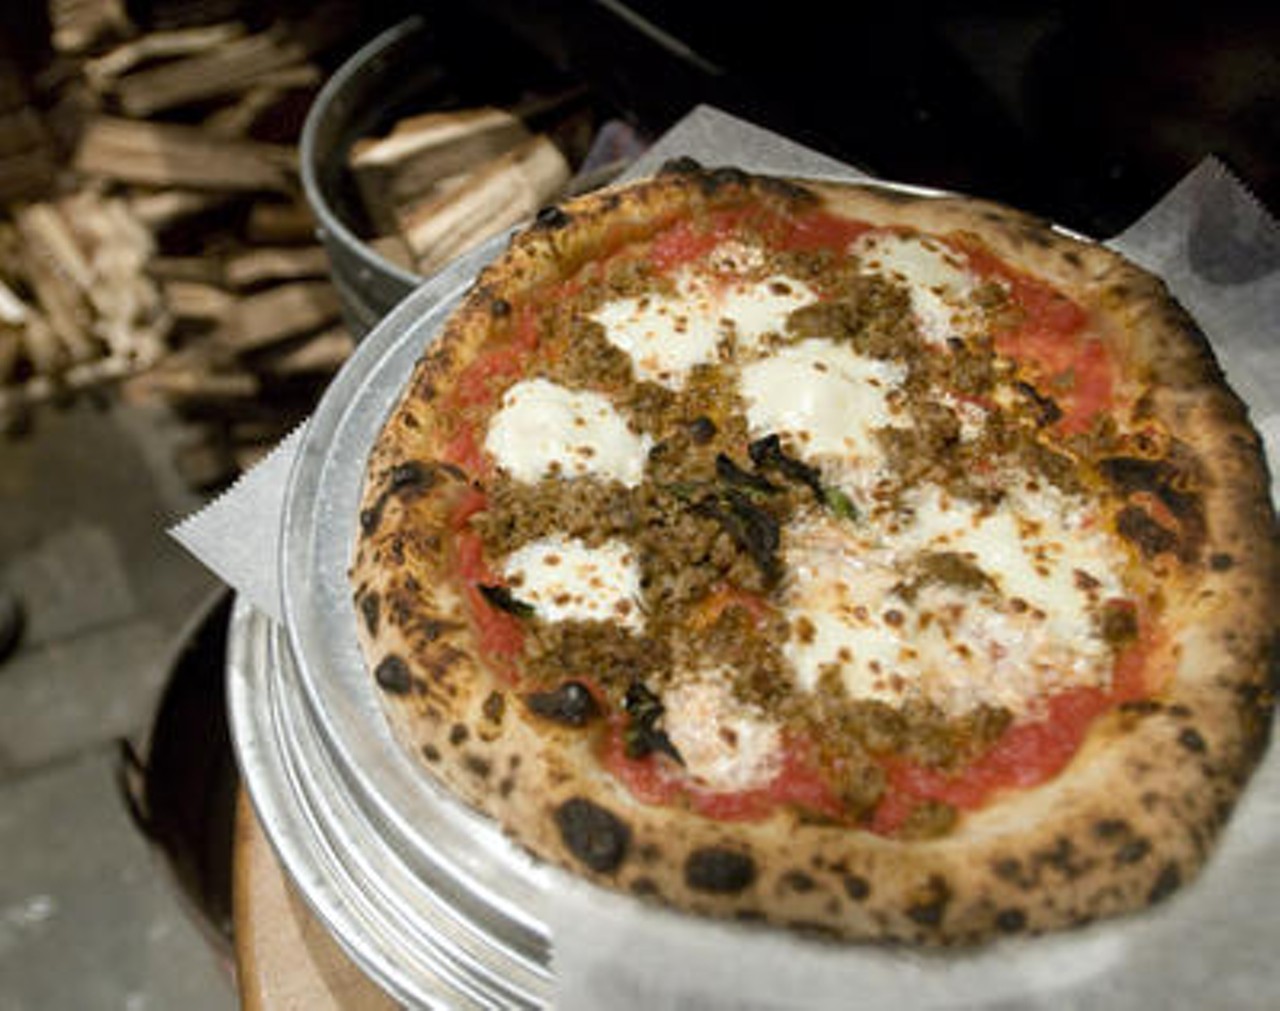 Mmm, pizza. Jennifer Silverberg headed to the kitchen of the Good Pie, the new Neapolitan-style pizza restaurant in Midtown. Tasty photos.